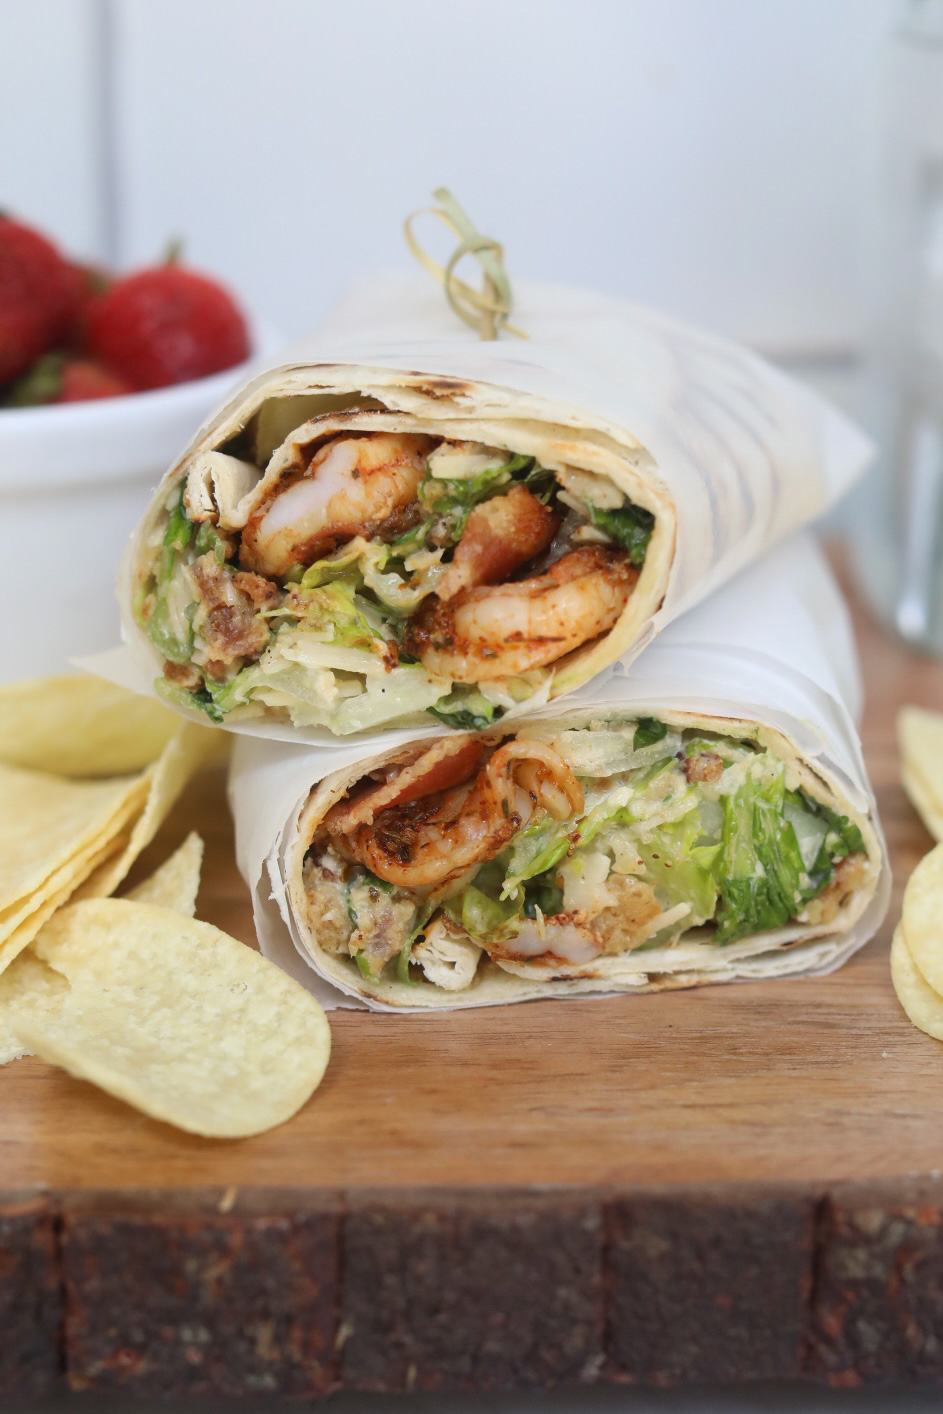 Shrimp wraps with caesar dressing cut in half and wrapped in parchment paper, stacked. Chips and a bowl of strawberries added for styling purposes.